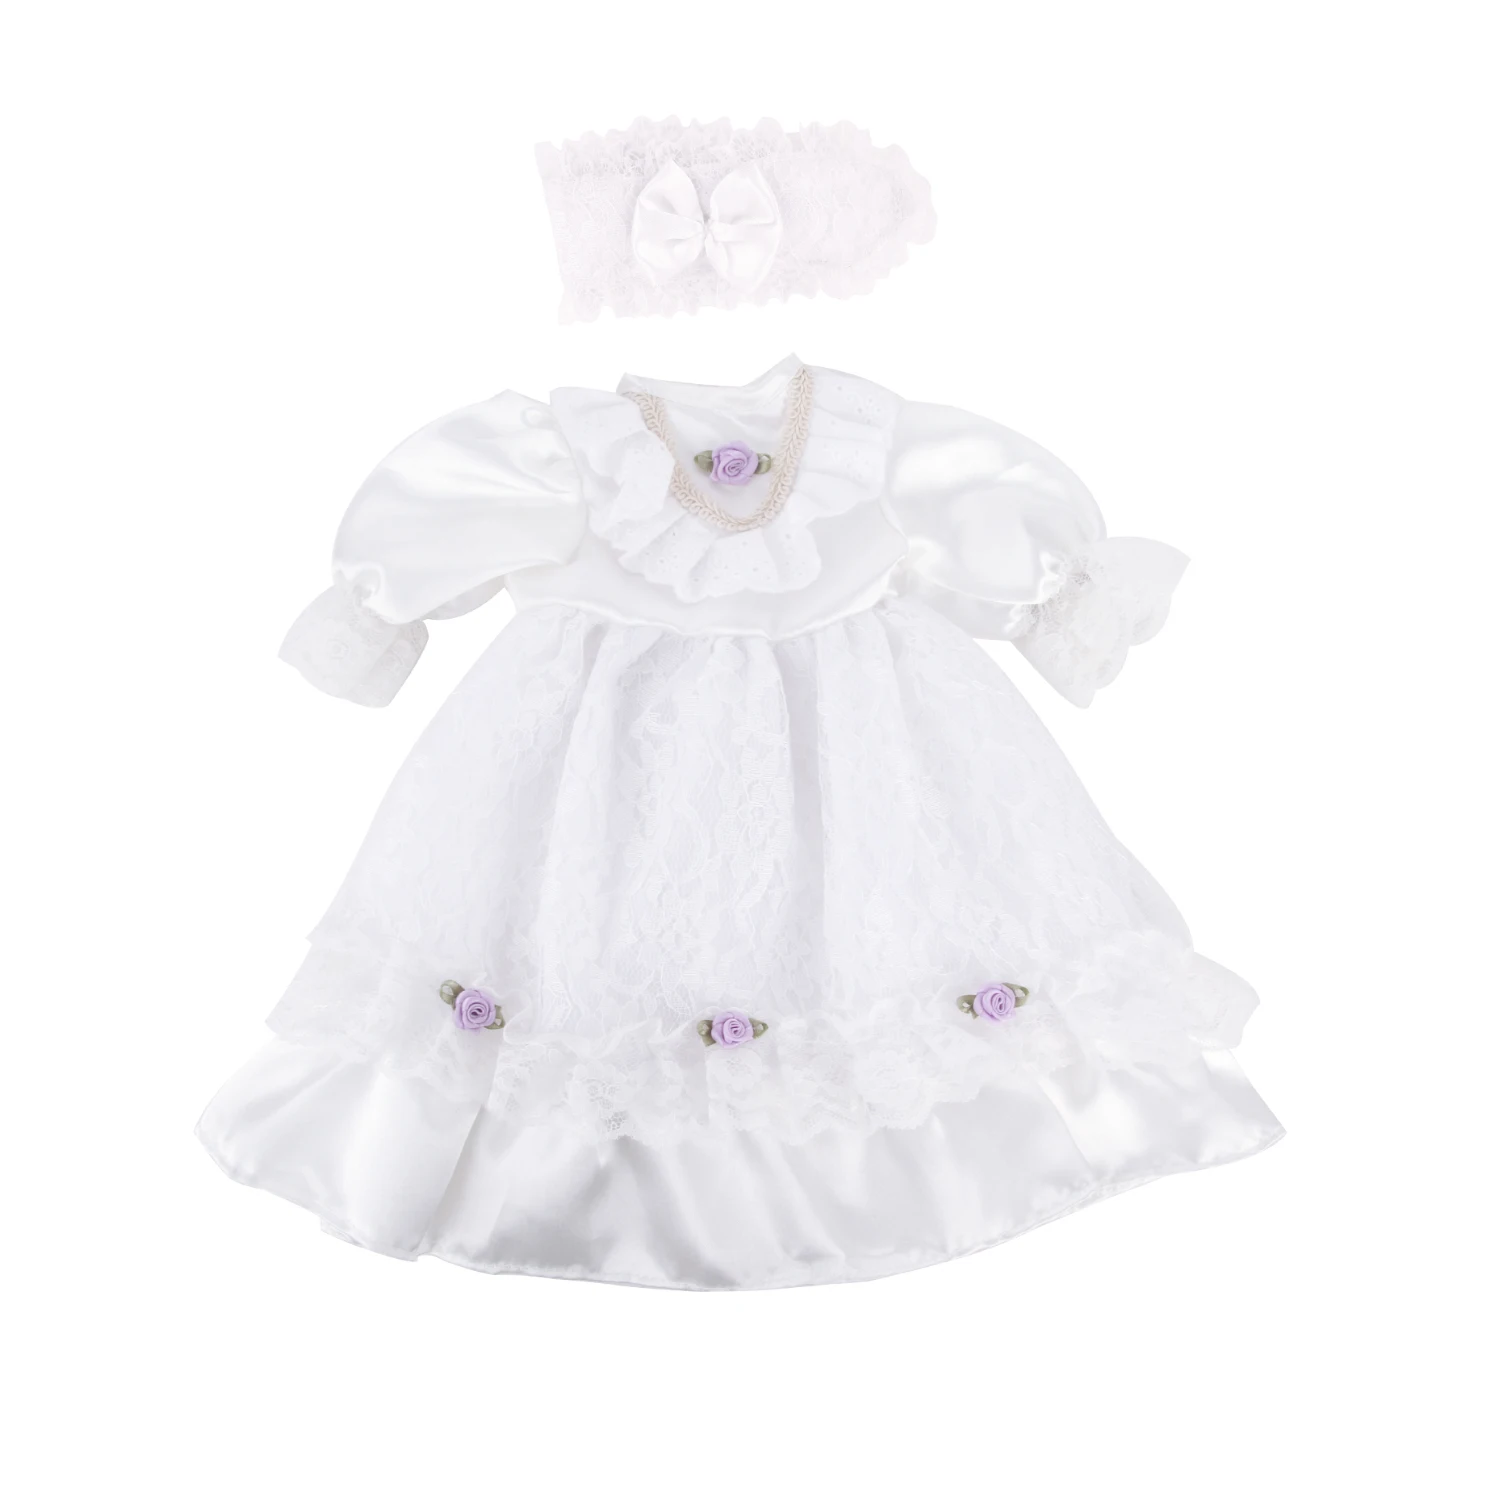 New Baby Doll Clothes Doll white Lace skirt For 45cm Baby Dolls